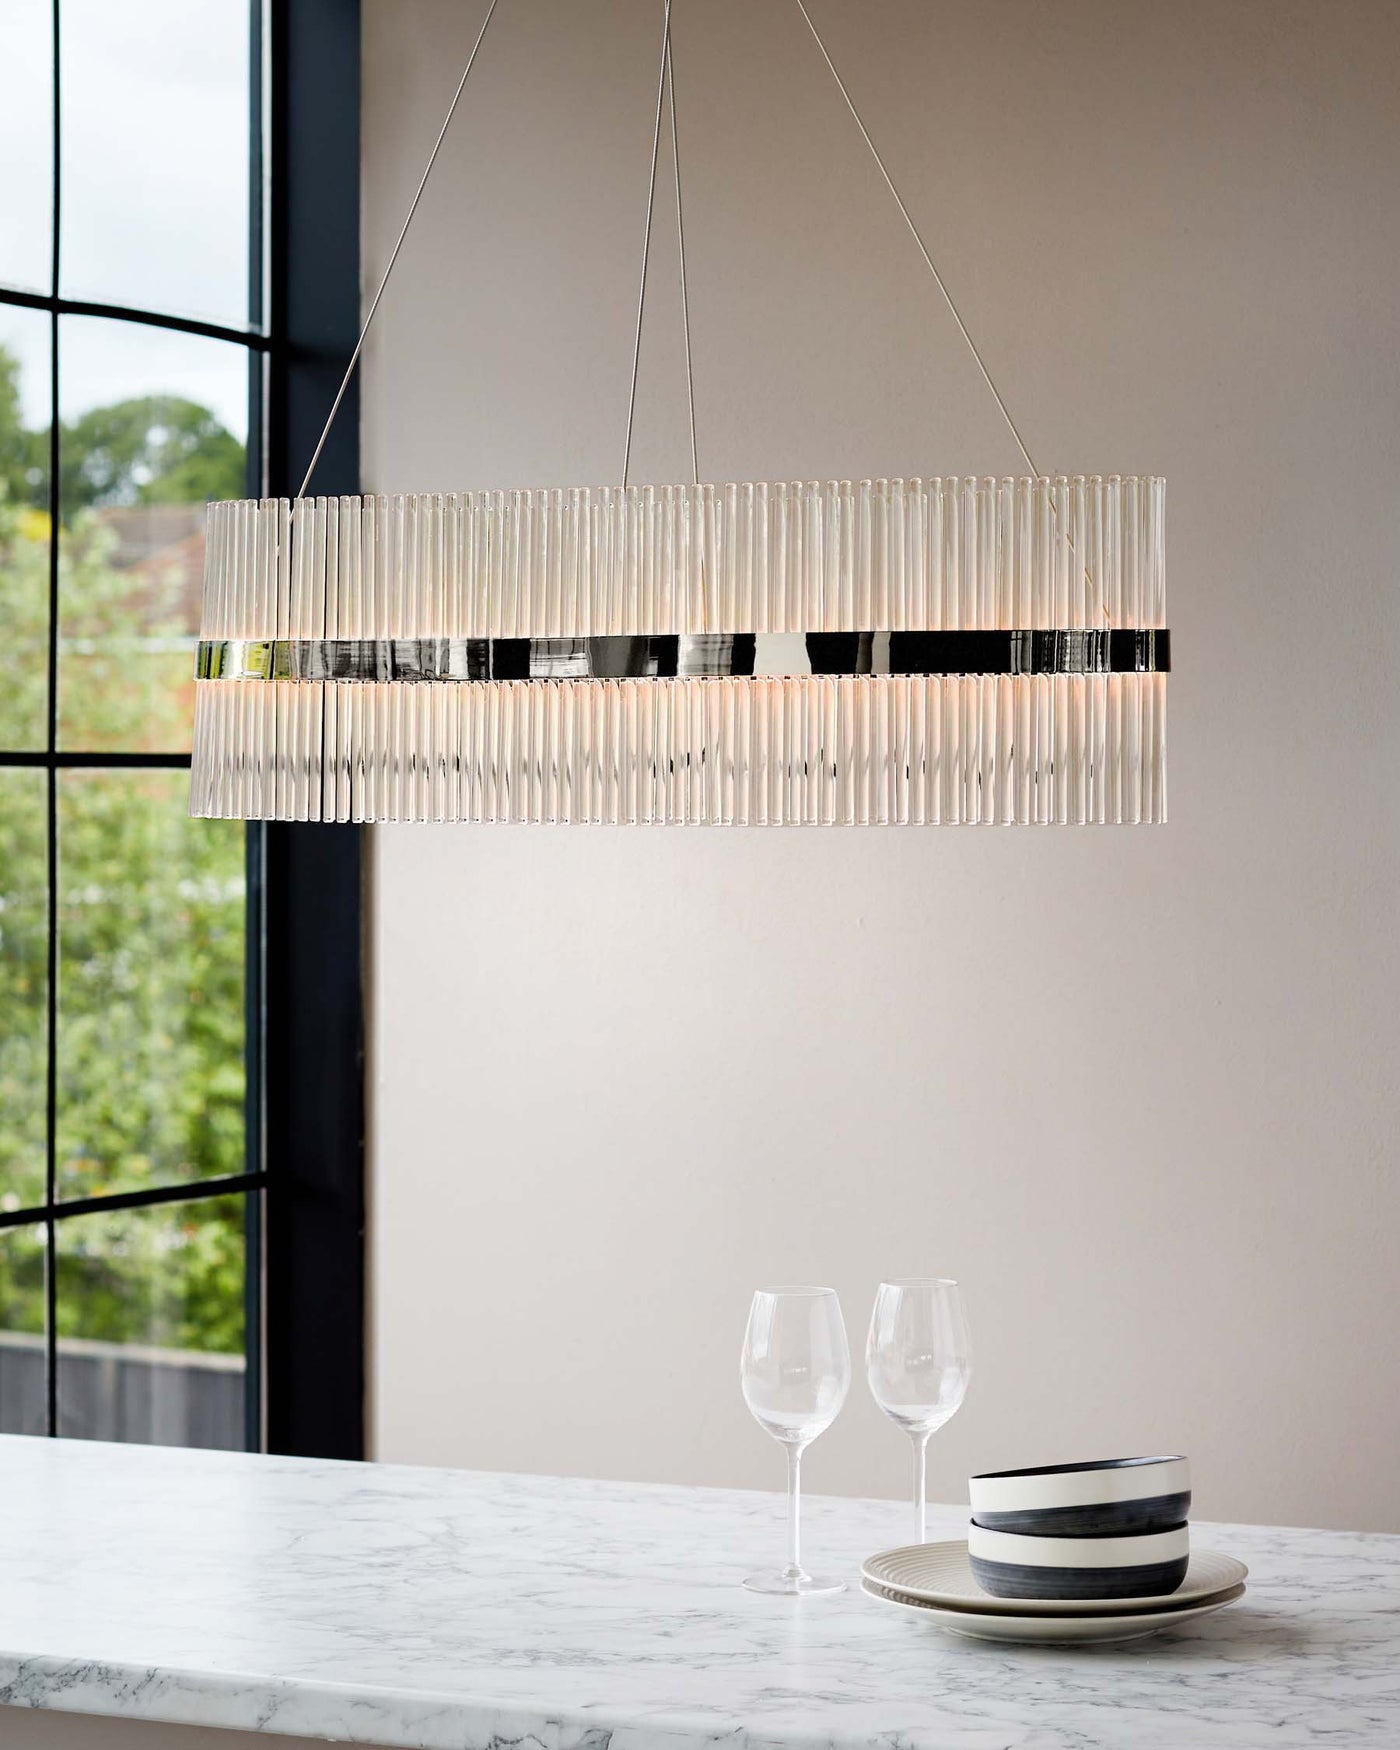 Elegant rectangular chandelier with vertical clear glass rods hanging above a sleek marble countertop, accented by two stemless wine glasses and a stack of modern two-tone plates on a round woven placemat.